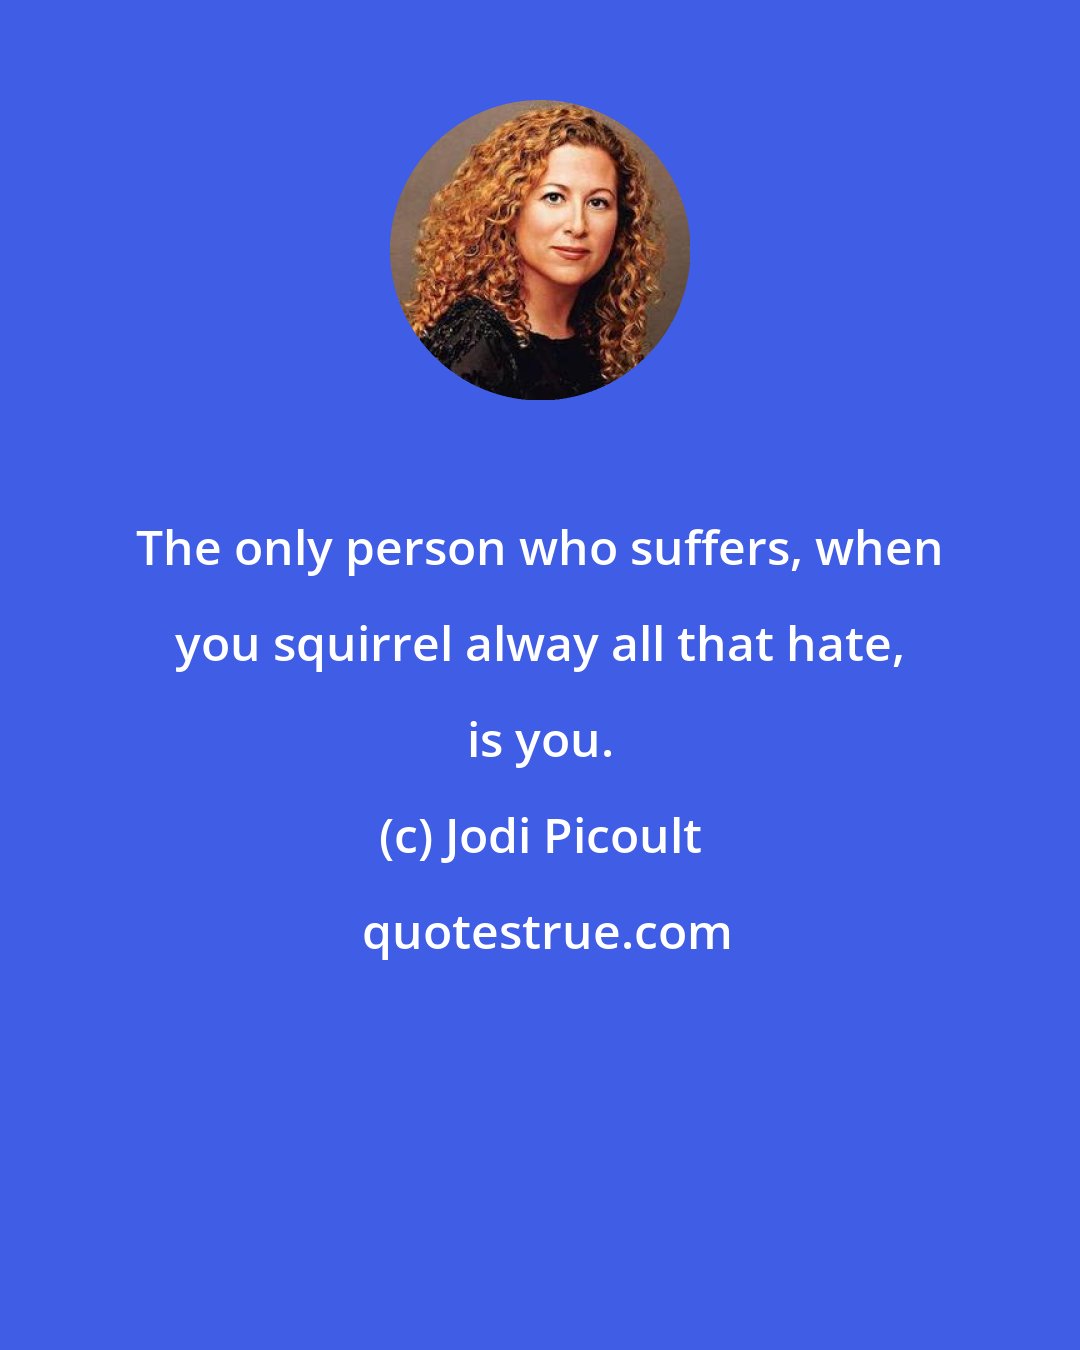 Jodi Picoult: The only person who suffers, when you squirrel alway all that hate, is you.